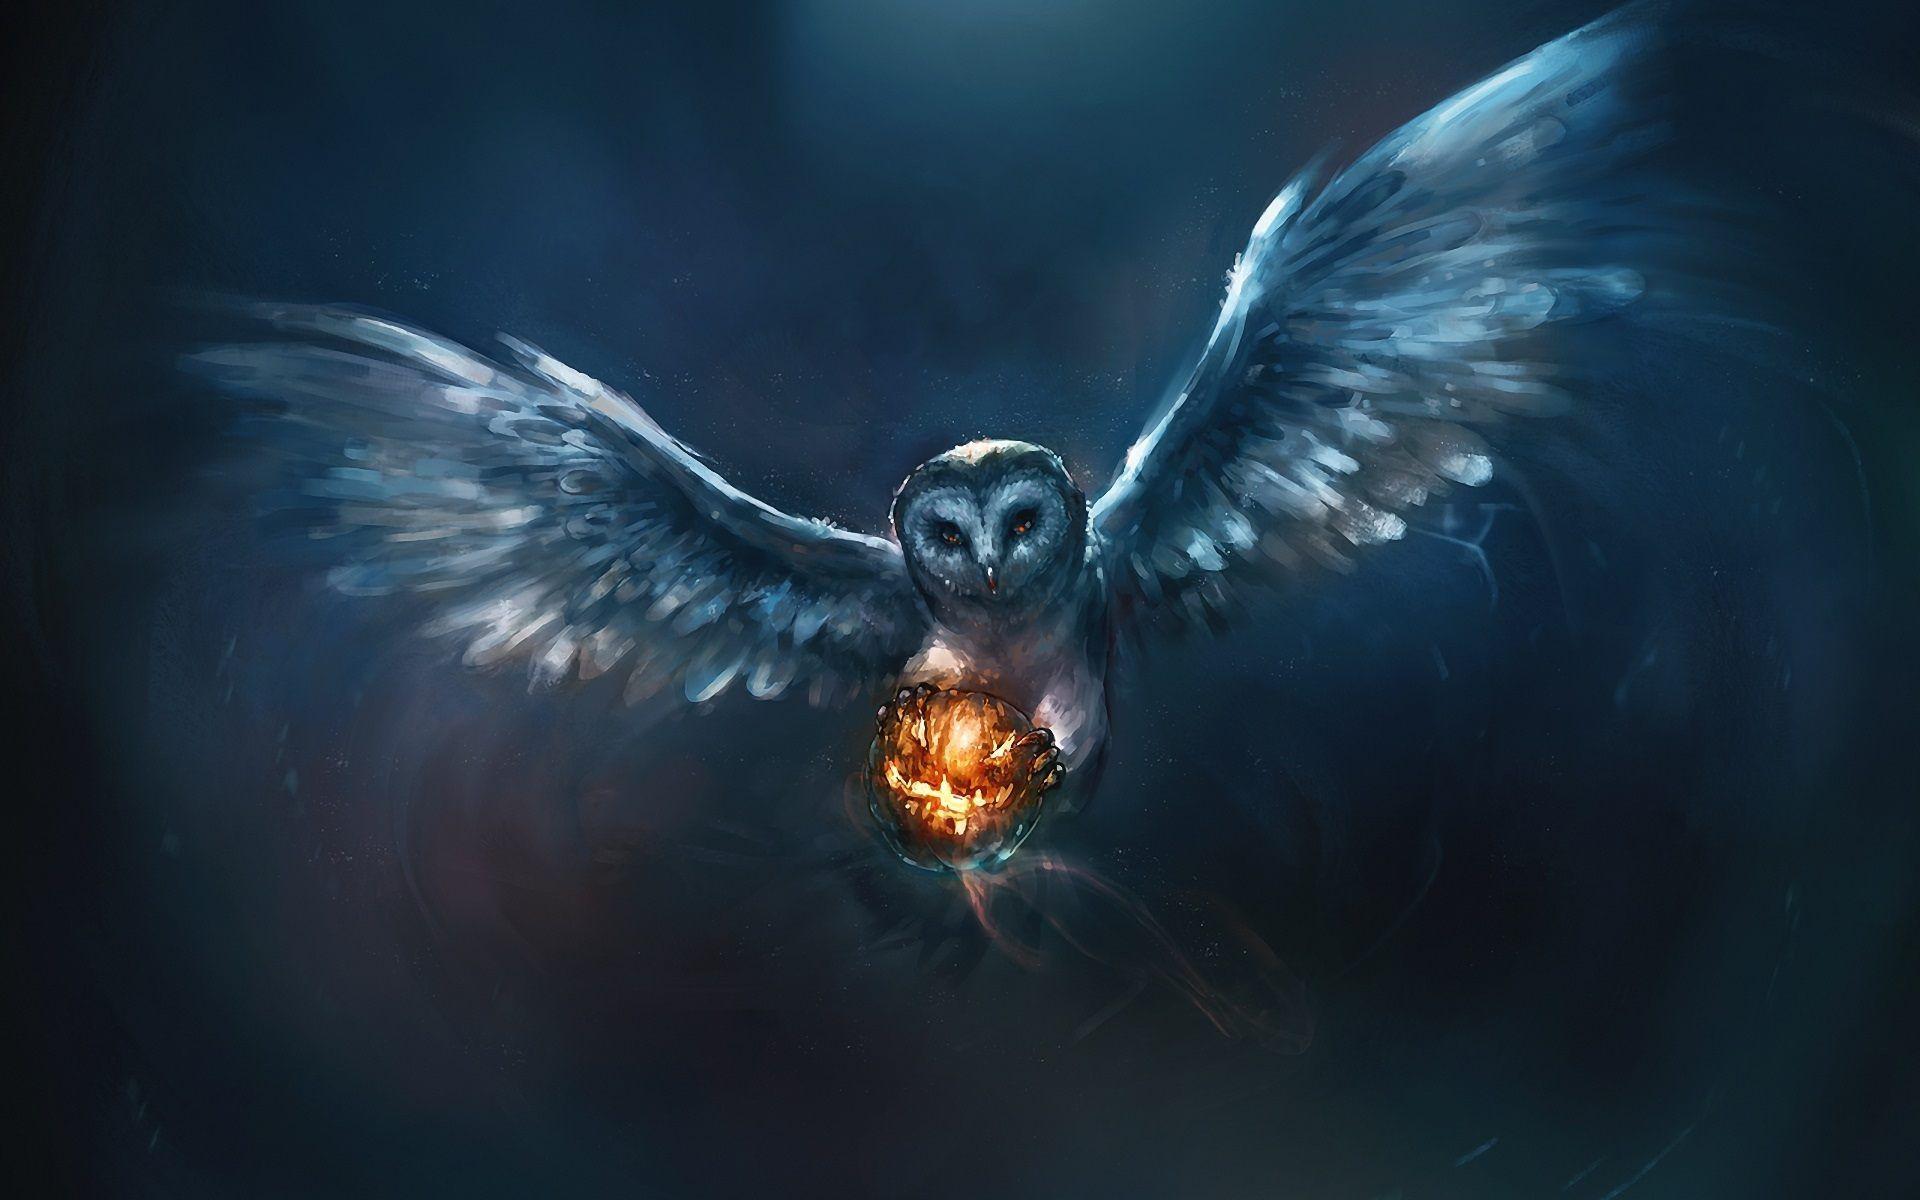 Owl Painting And Fire Ball. GFXHive. HD